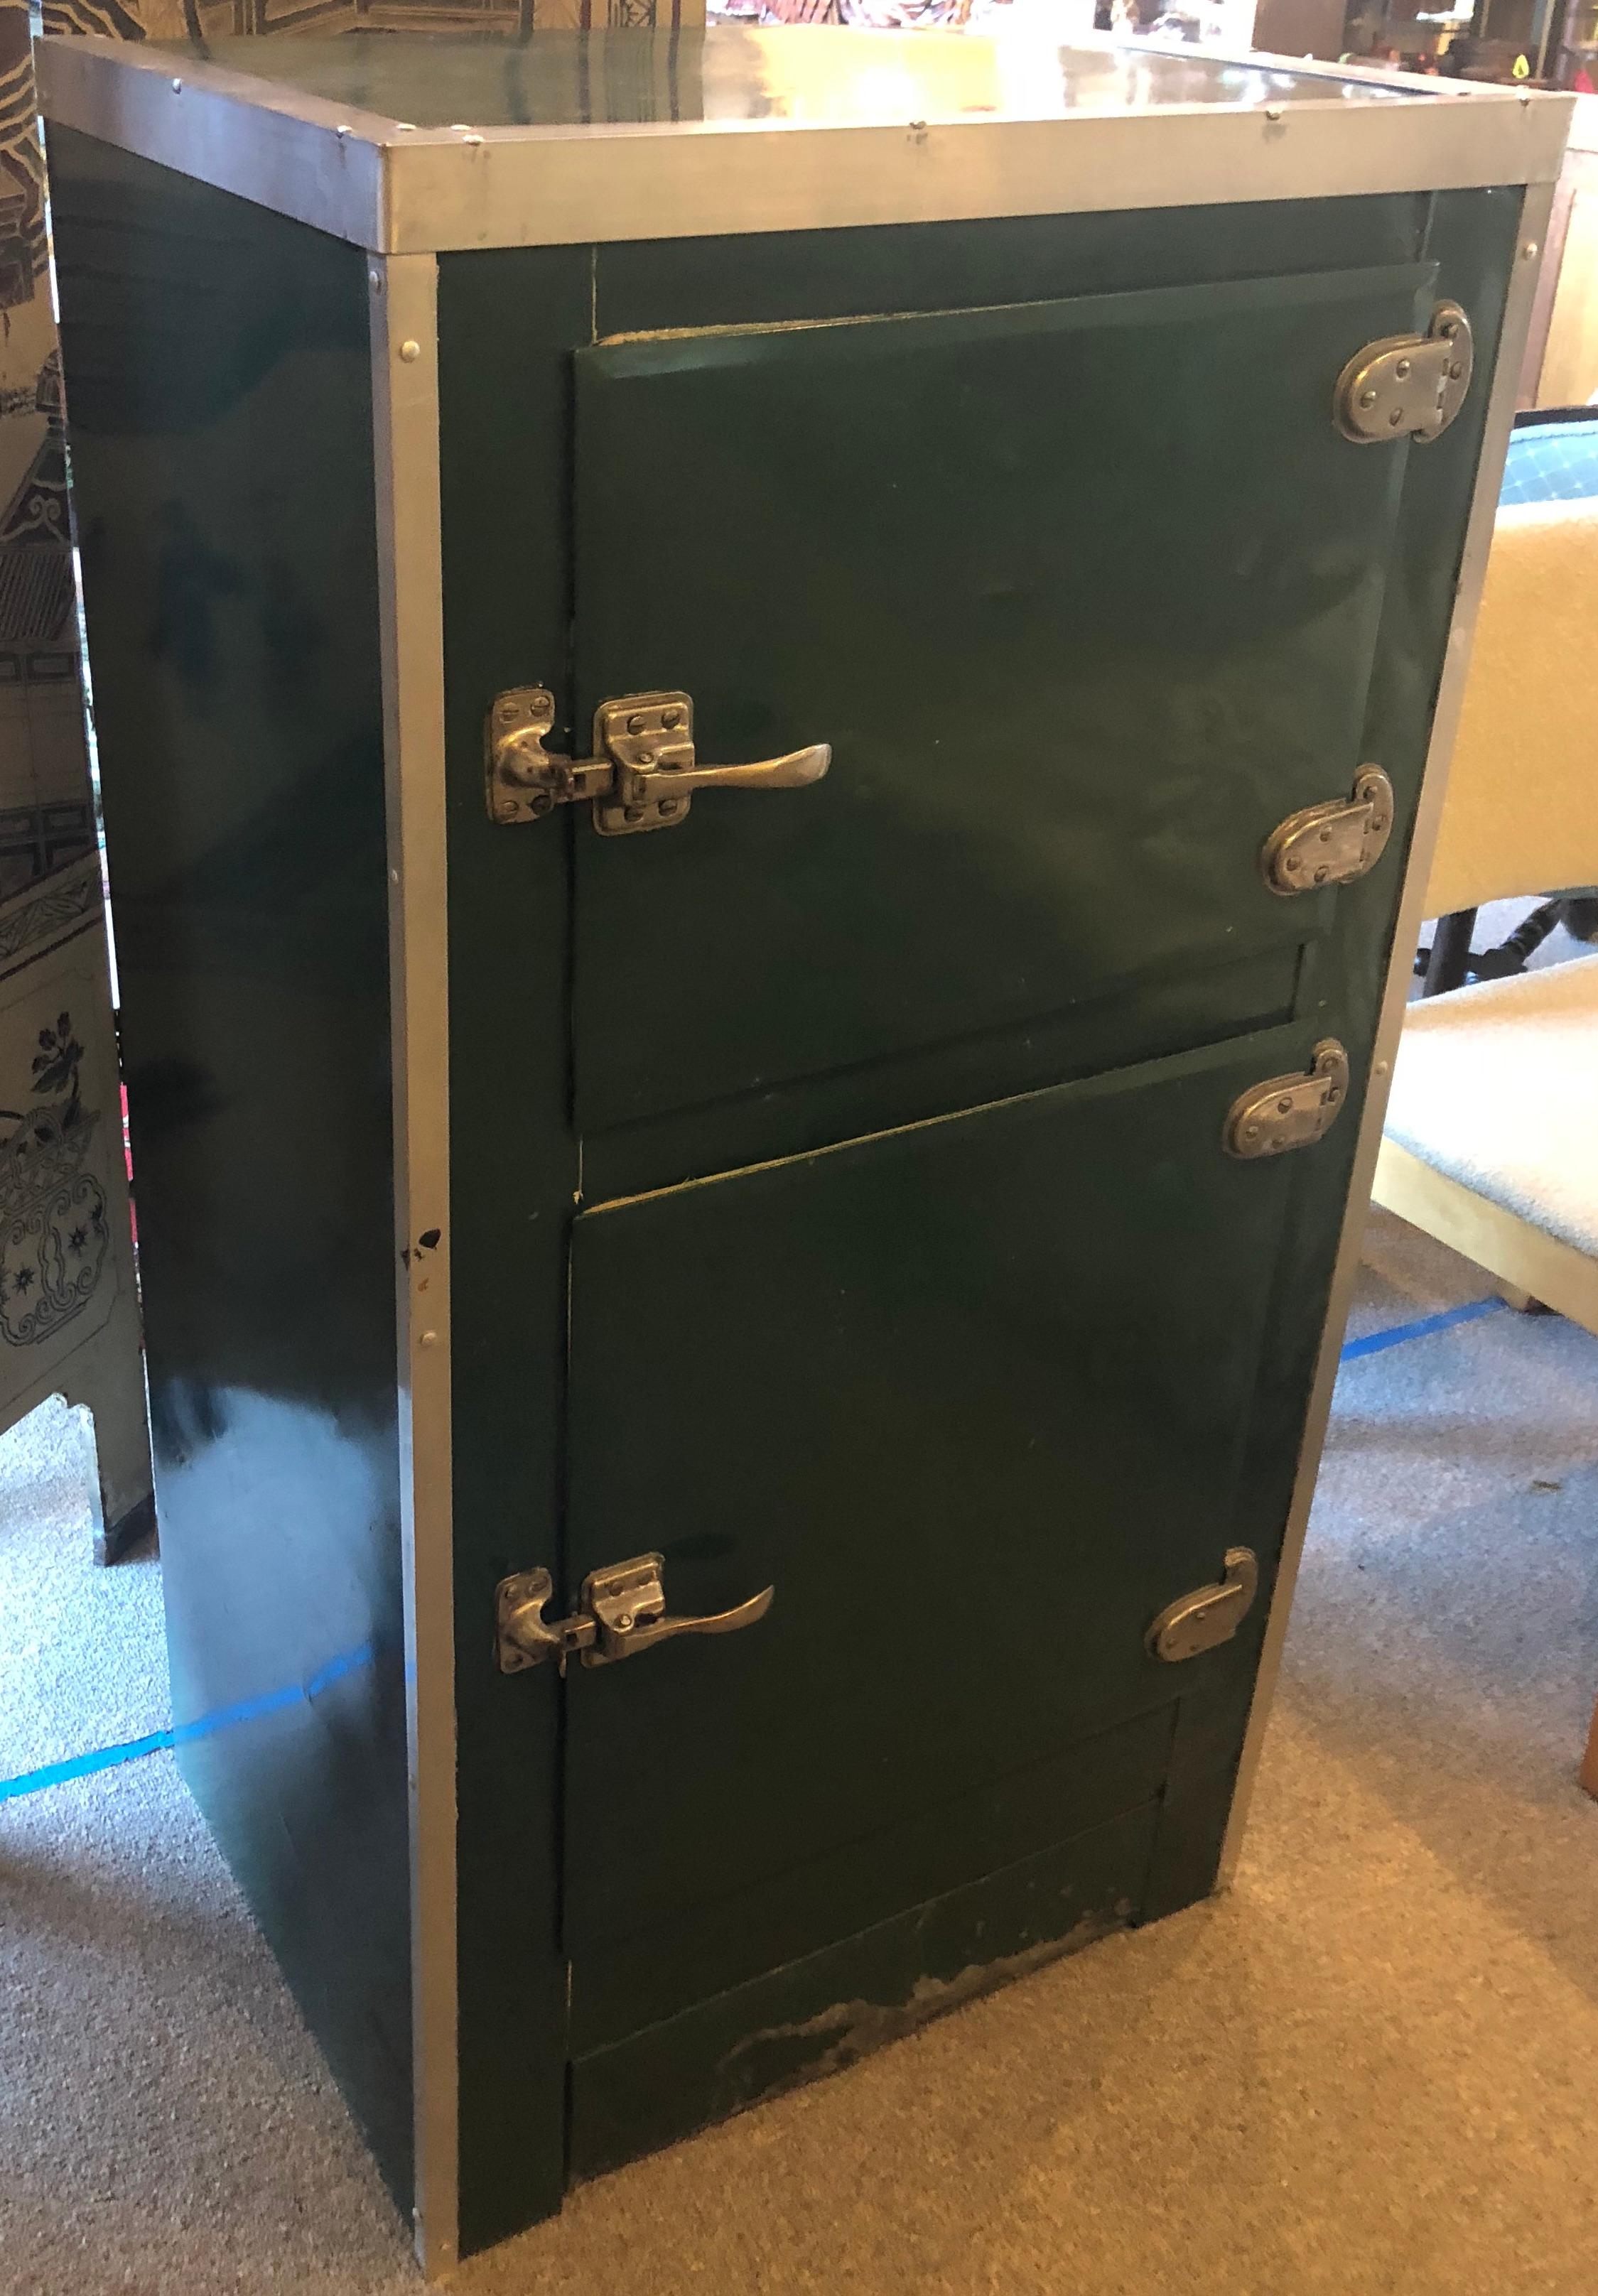 Storage cabinet from porcelain ice box in good condition with some character marks of time and use, circa 1930s. Lovely spruce green wrapped porcelain around wooden frame with aluminum trim and steel handles on doors. Ideal home bar. How about a